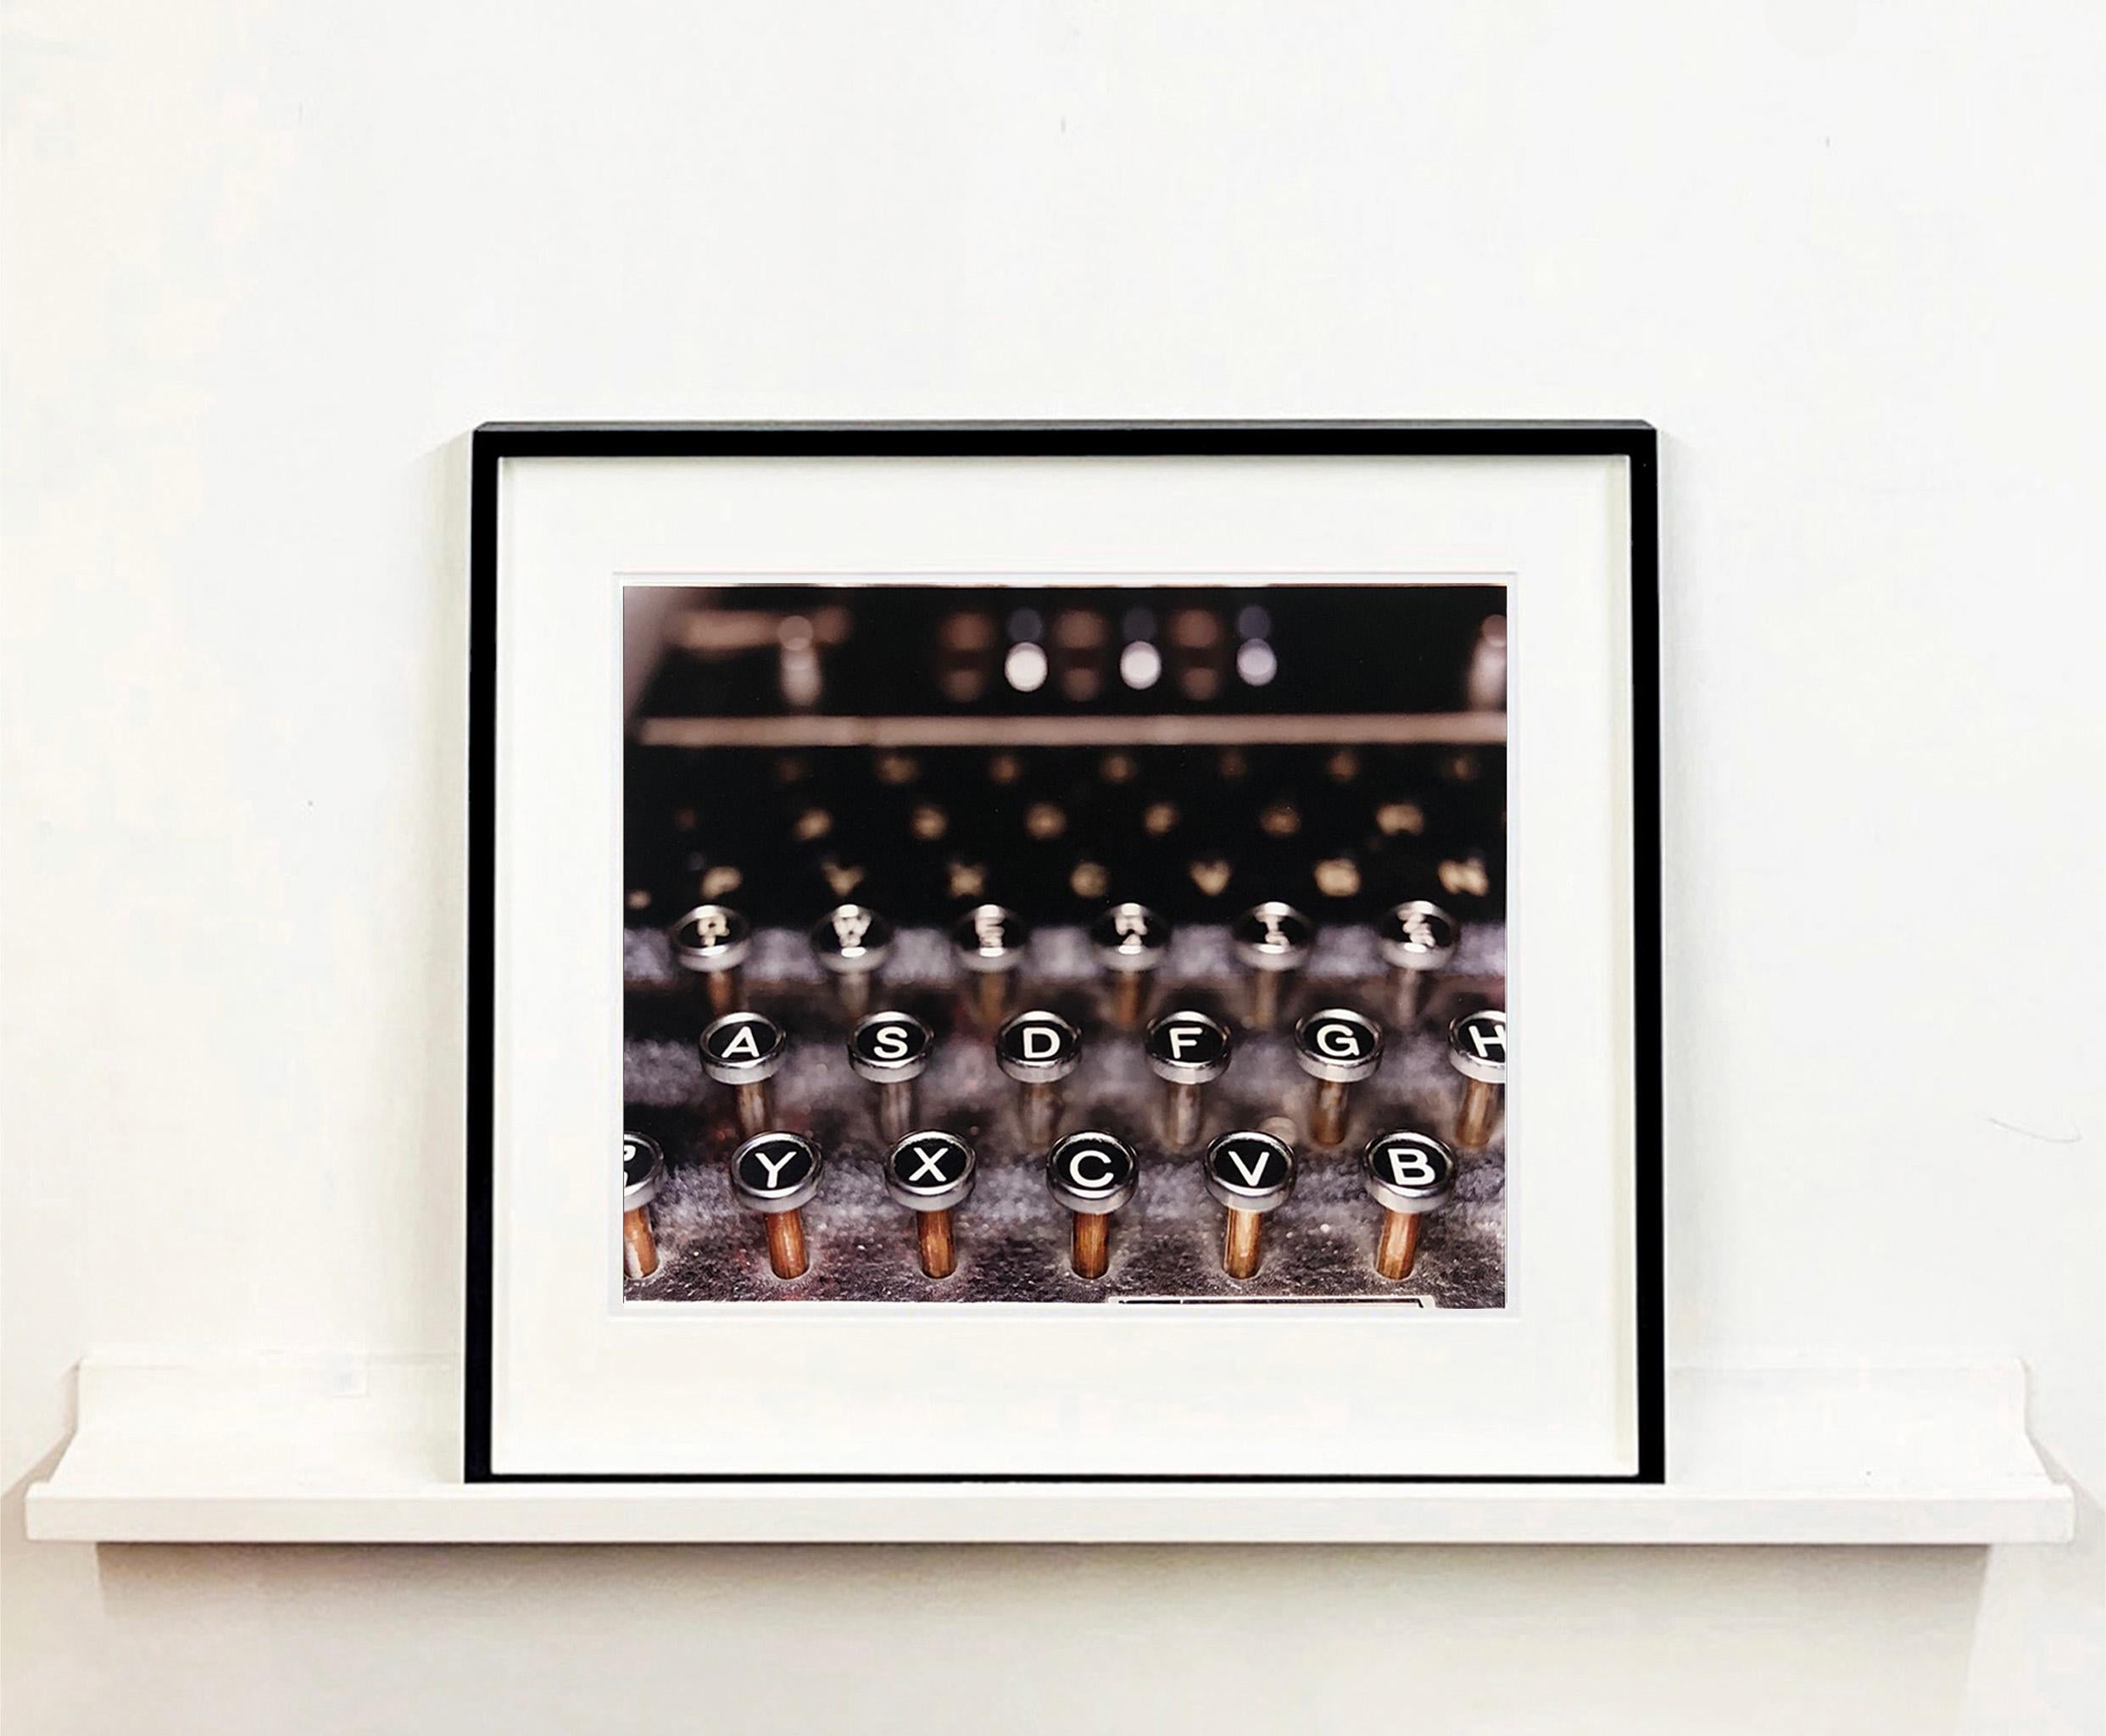 The Enigma Machine, Bletchley Park - Print by Richard Heeps